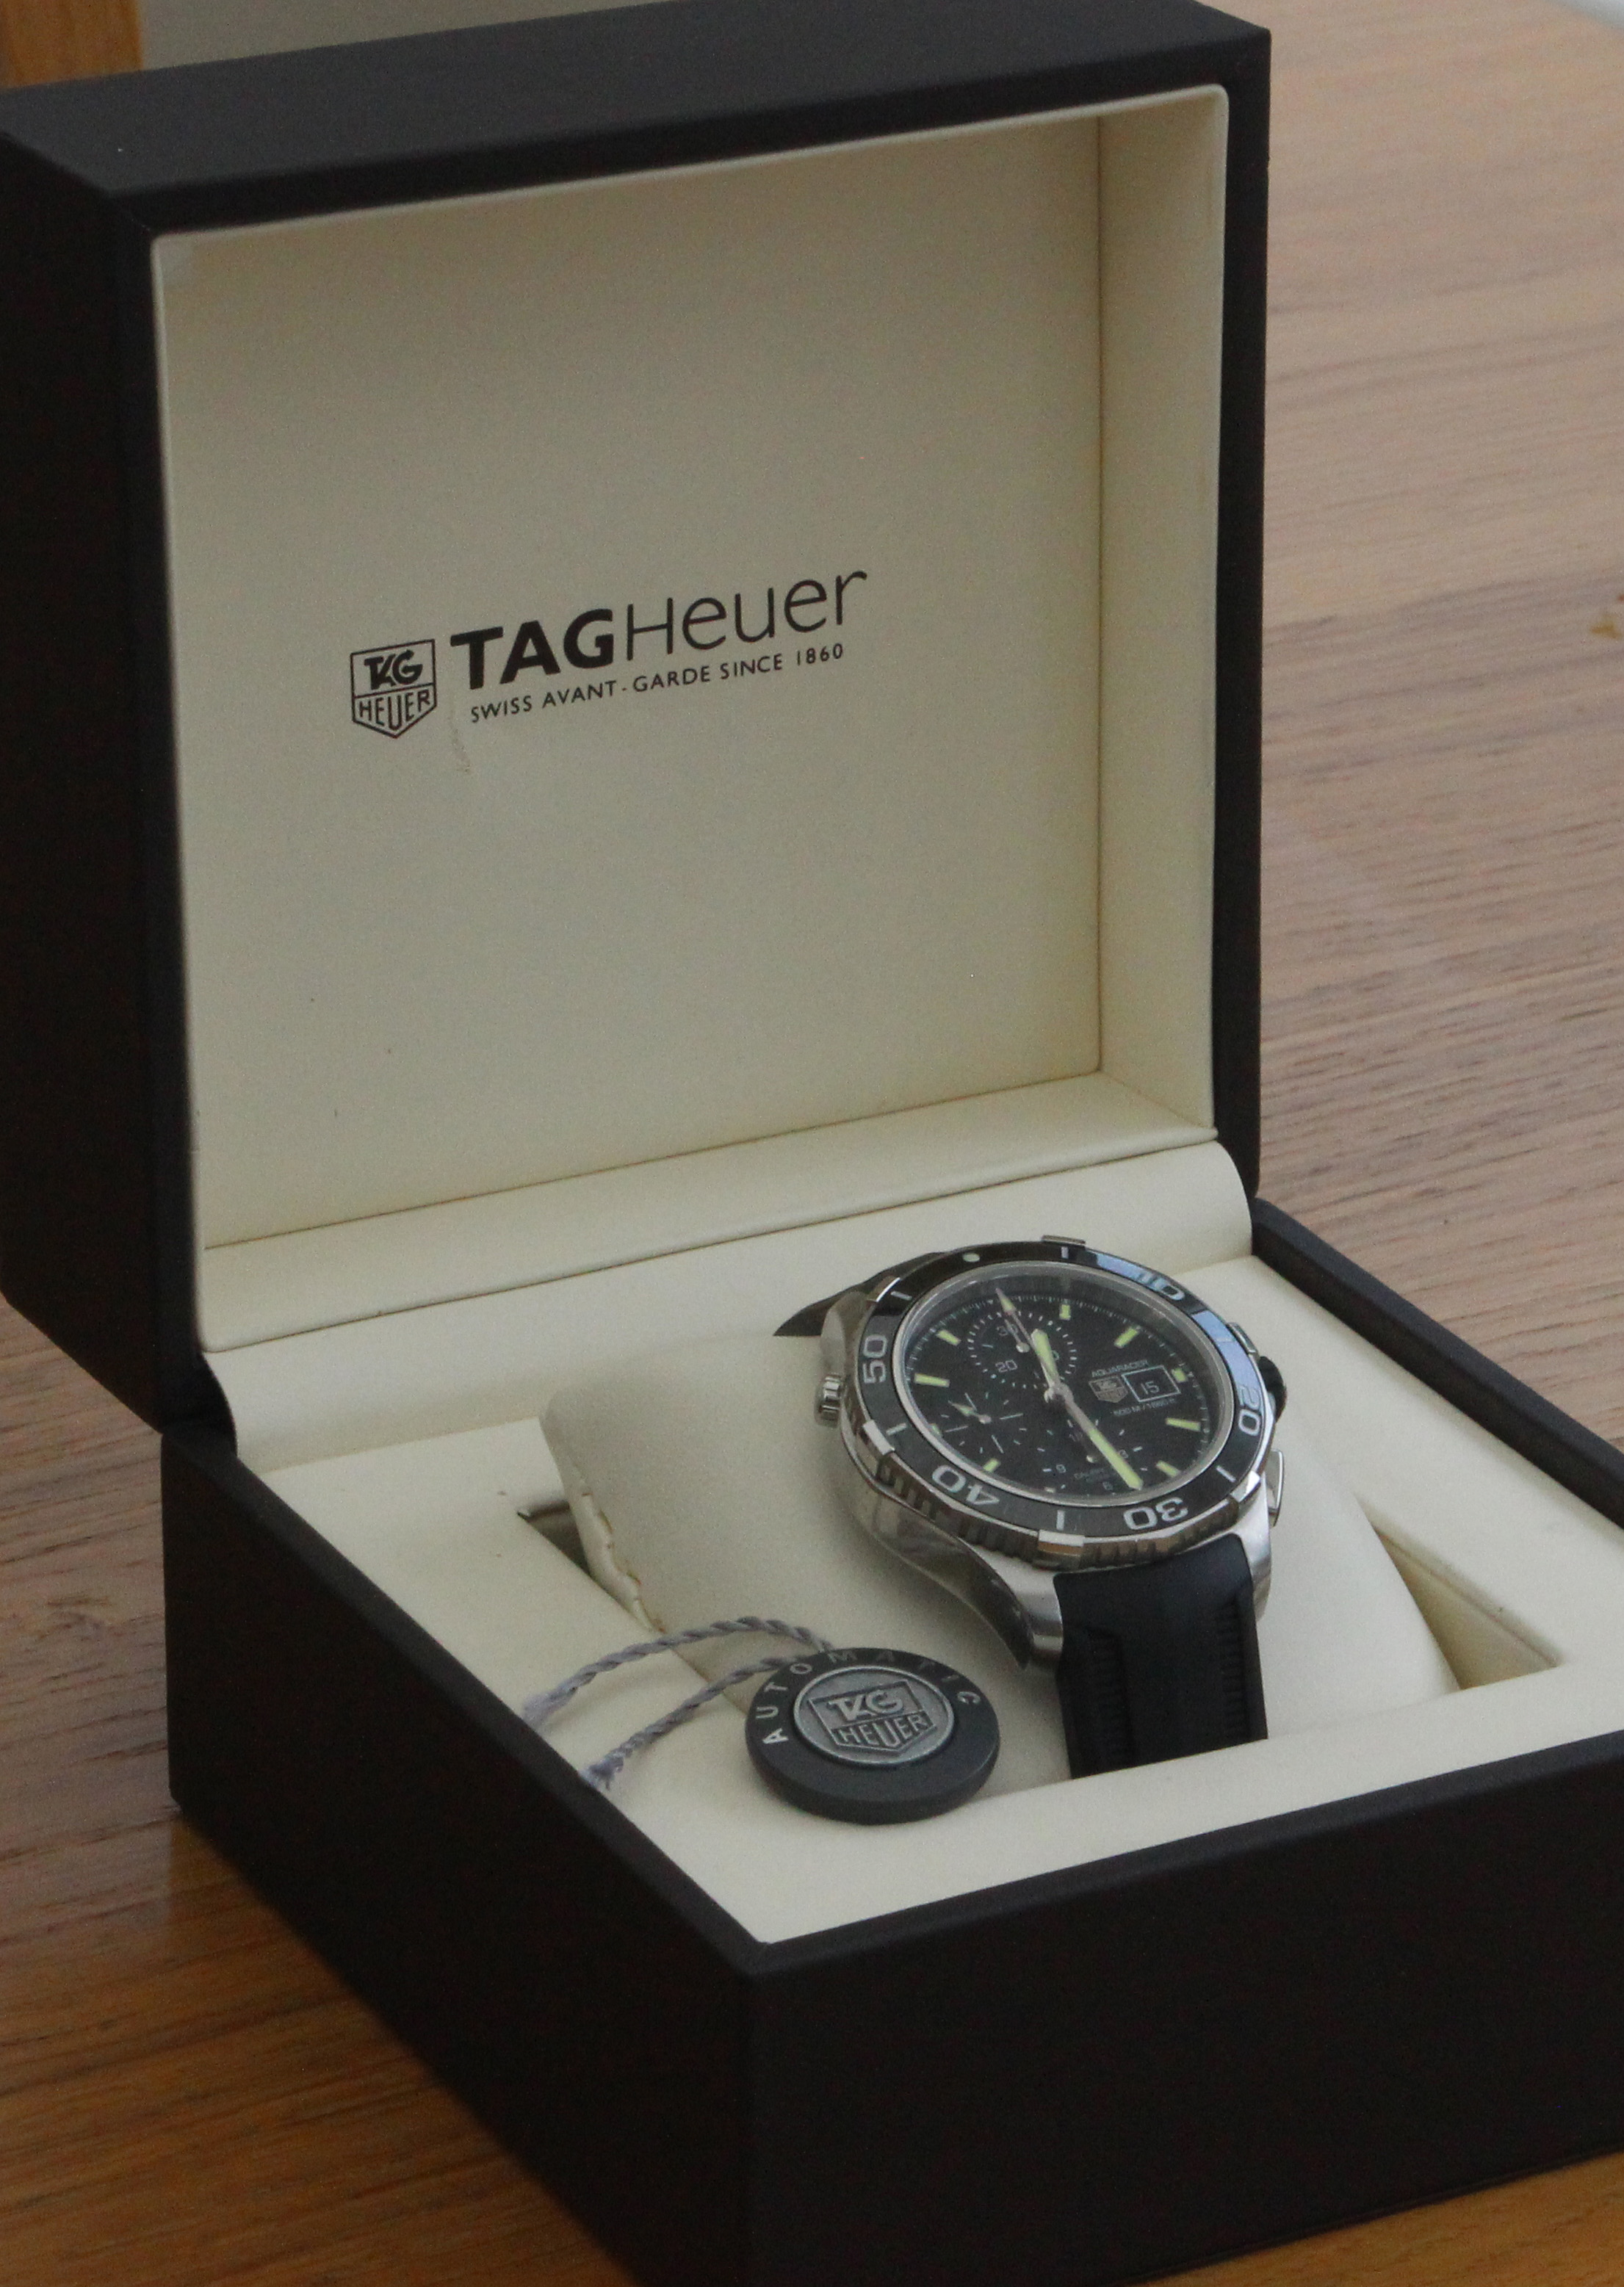 A Tag Heuer Aquaracer Calibre 16 automatic chronograph 500m, water resistant to 500m, helium valve - Image 5 of 8